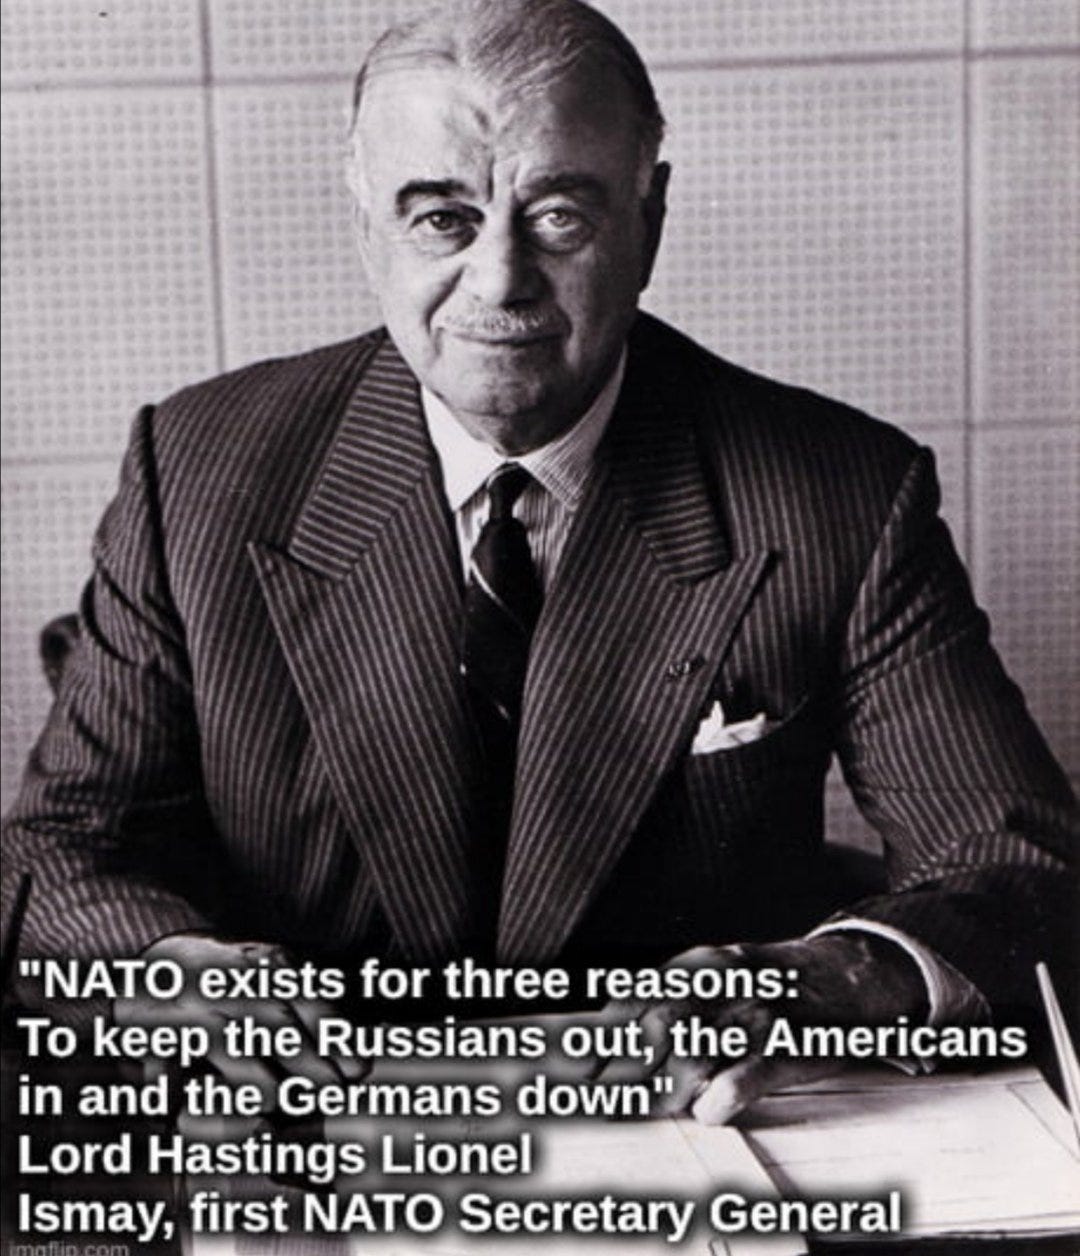 S.L. Kanthan on X: "NATO had three purposes in 1949: 🔹Keep Russians out  (of Europe) 🔹Keep Americans in (Europe) 🔹Keep Germans down Nothing has  changed in 75 years!" / X